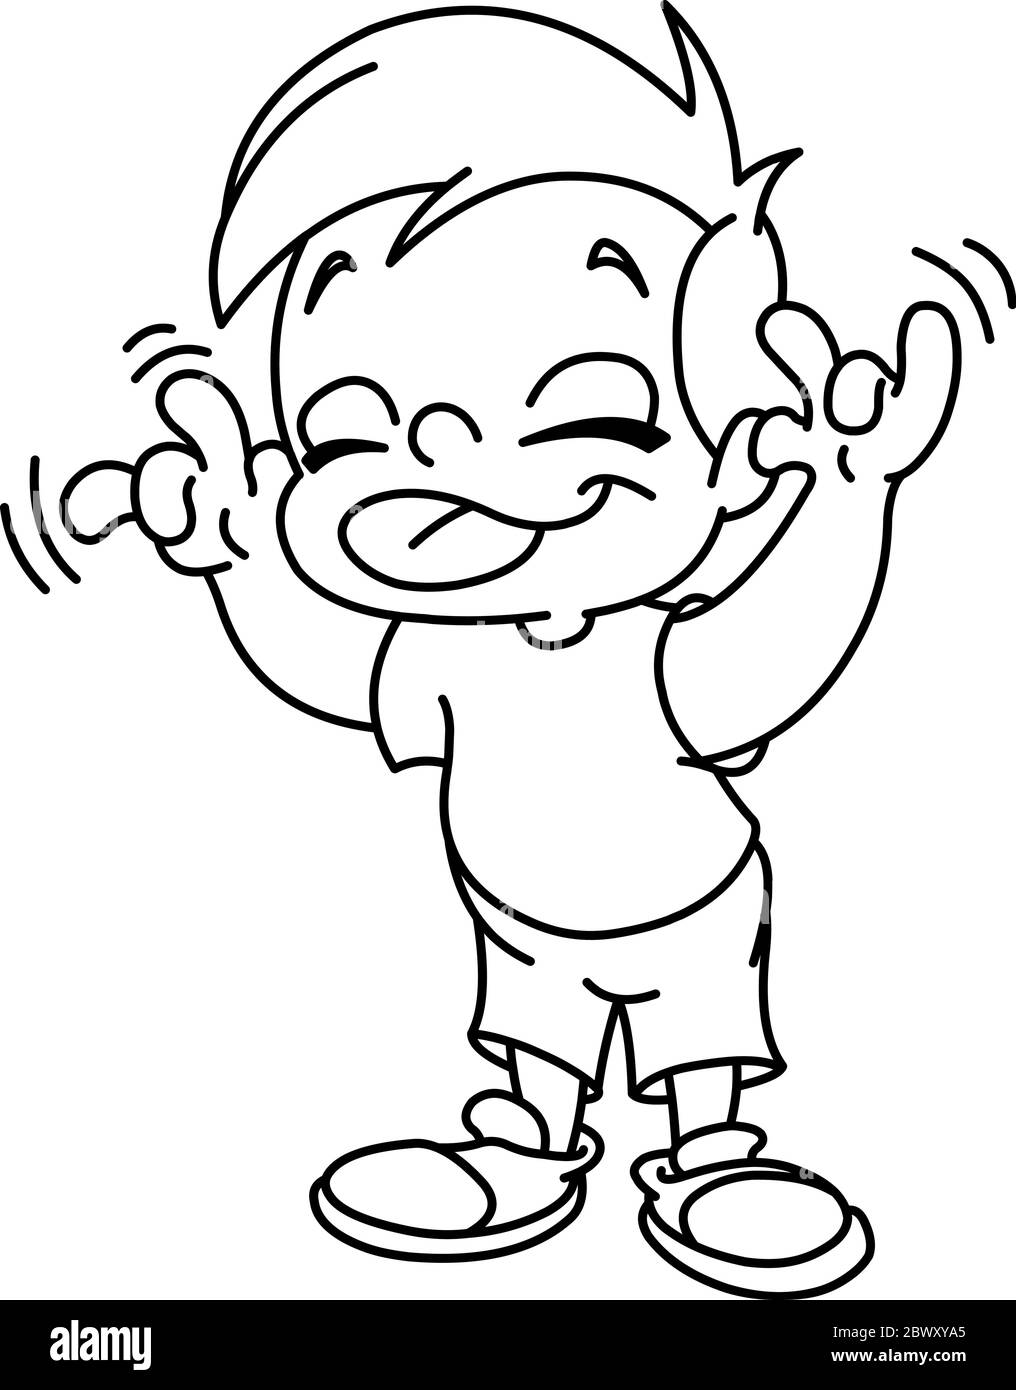 Outlined kid making a face and showing his tongue. Vector line art illustration coloring page. Stock Vector